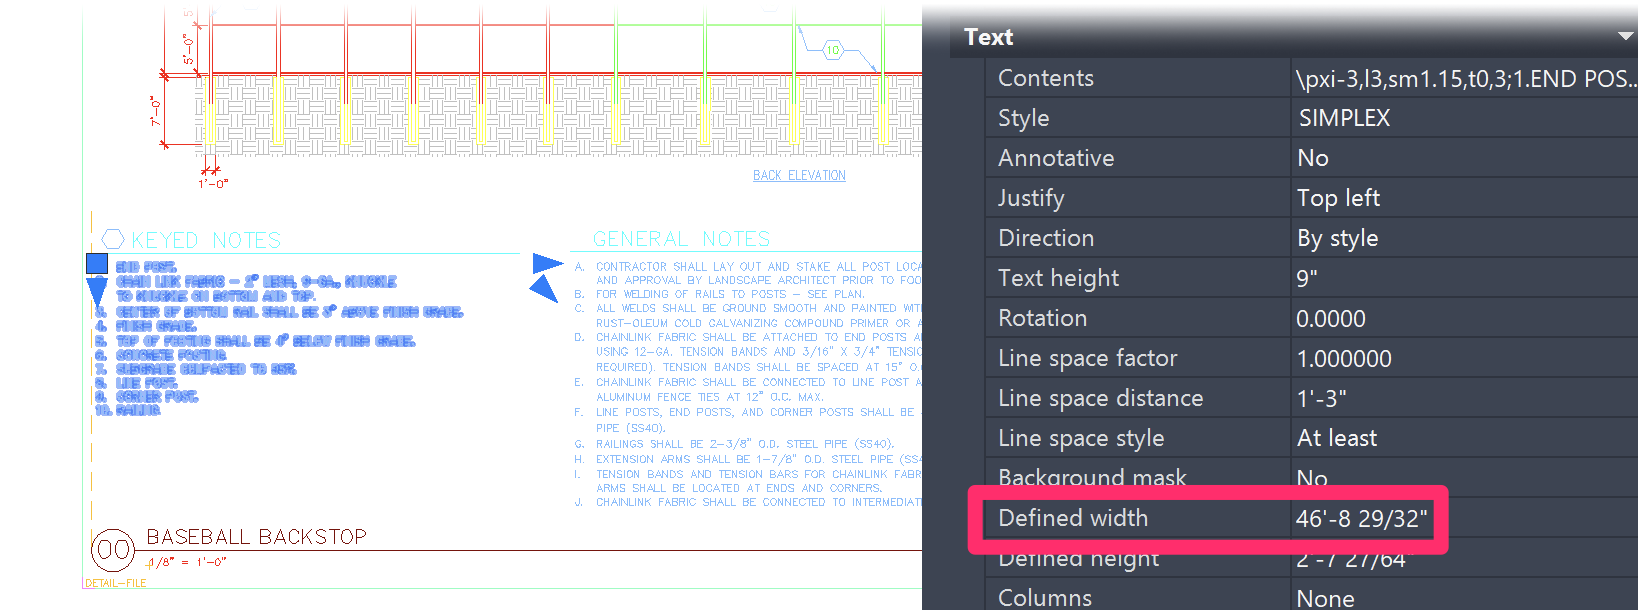 Defined width setting in Properties panel set to an appropriate value